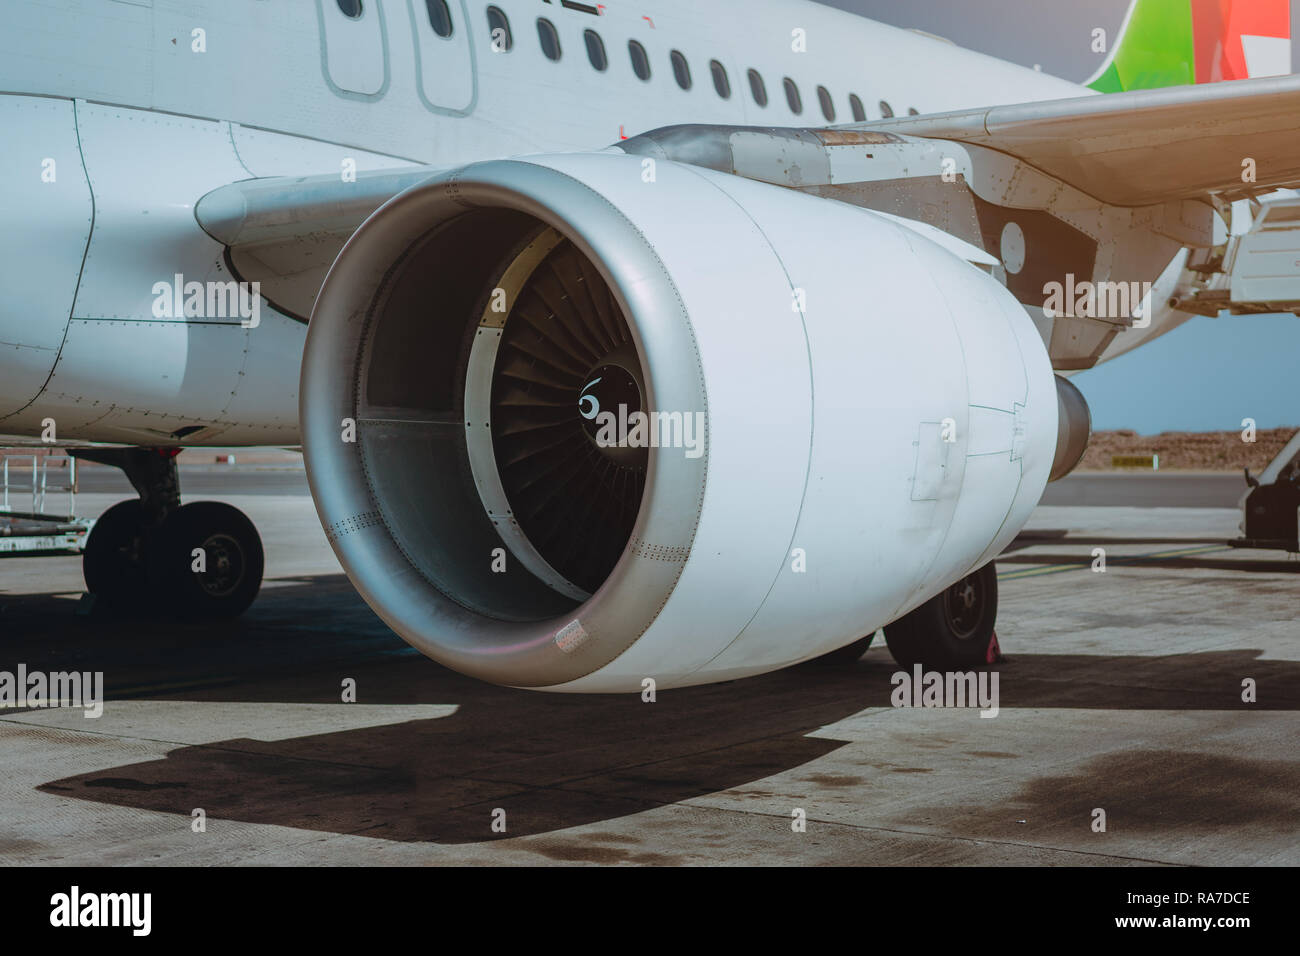 Turbine of passenger jet that waiting for departure in airport in warm afternoon light. Stock Photo